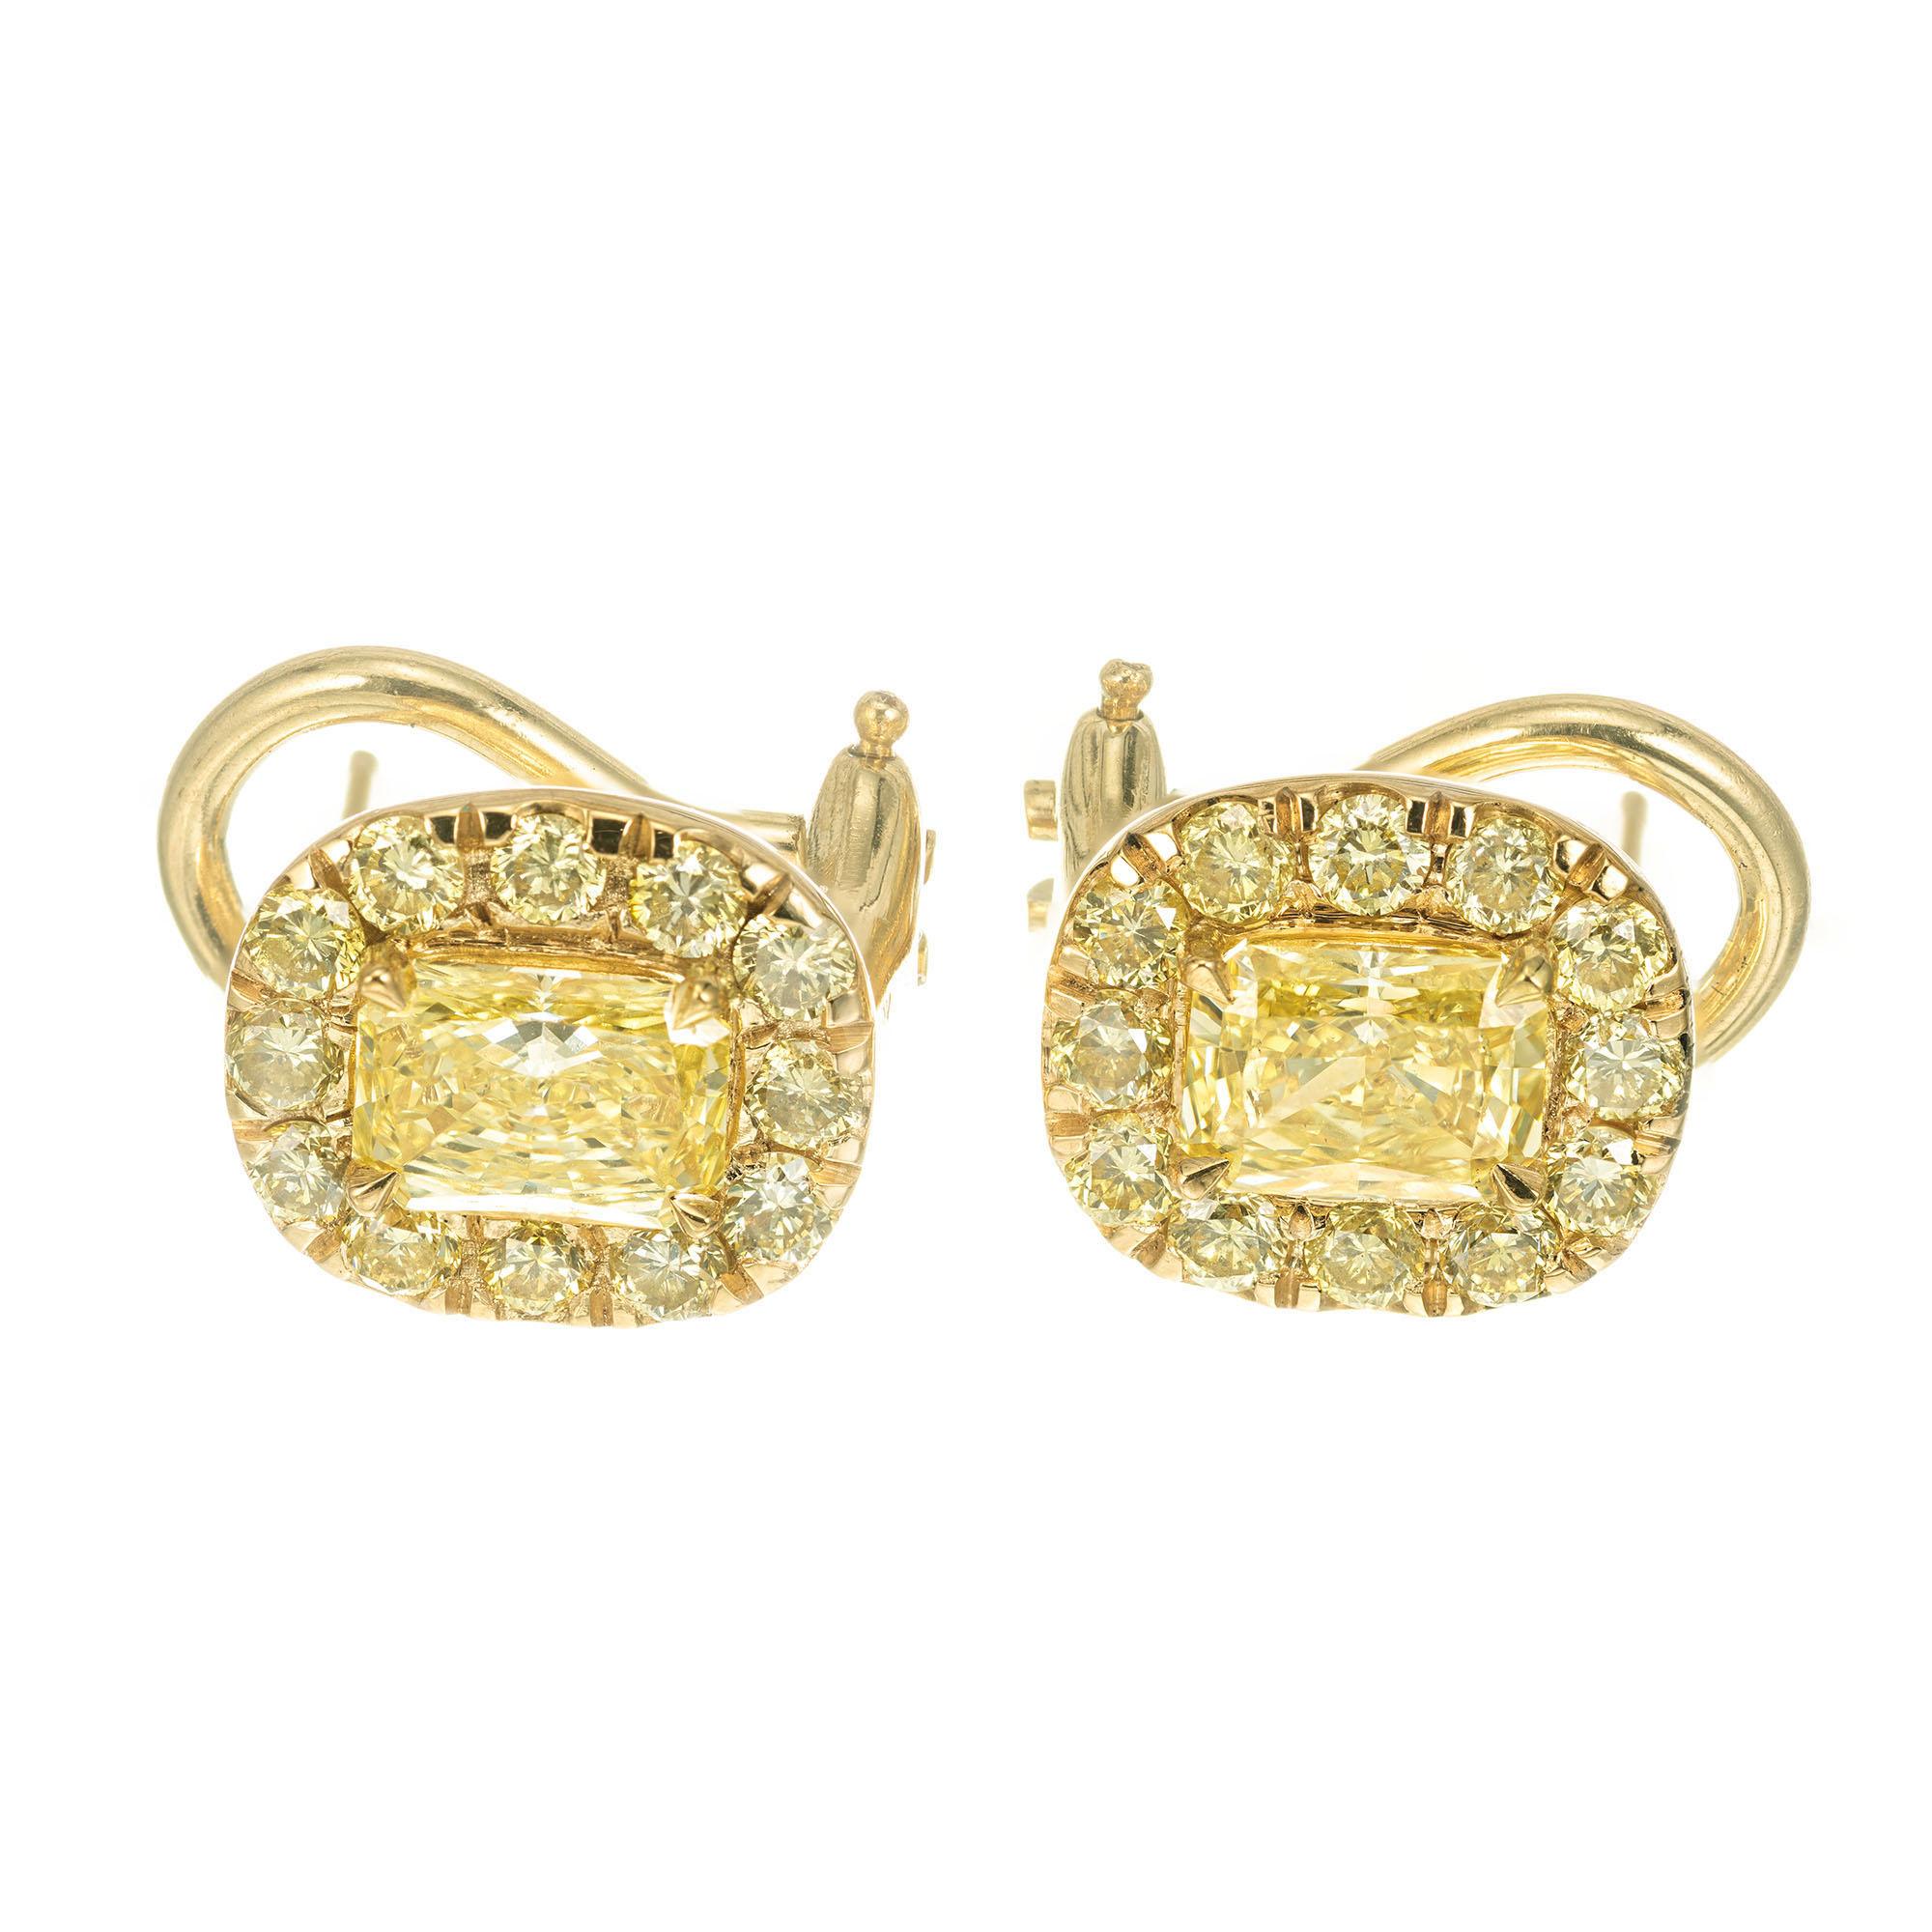 Peter Suchy natural fancy Intense yellow diamond earrings. GIA certified center diamonds surrounded by a row of fancy intense yellow round diamonds in hand made 18k yellow gold clip and post settings. Created in the Peter Suchy Workshop. 

1